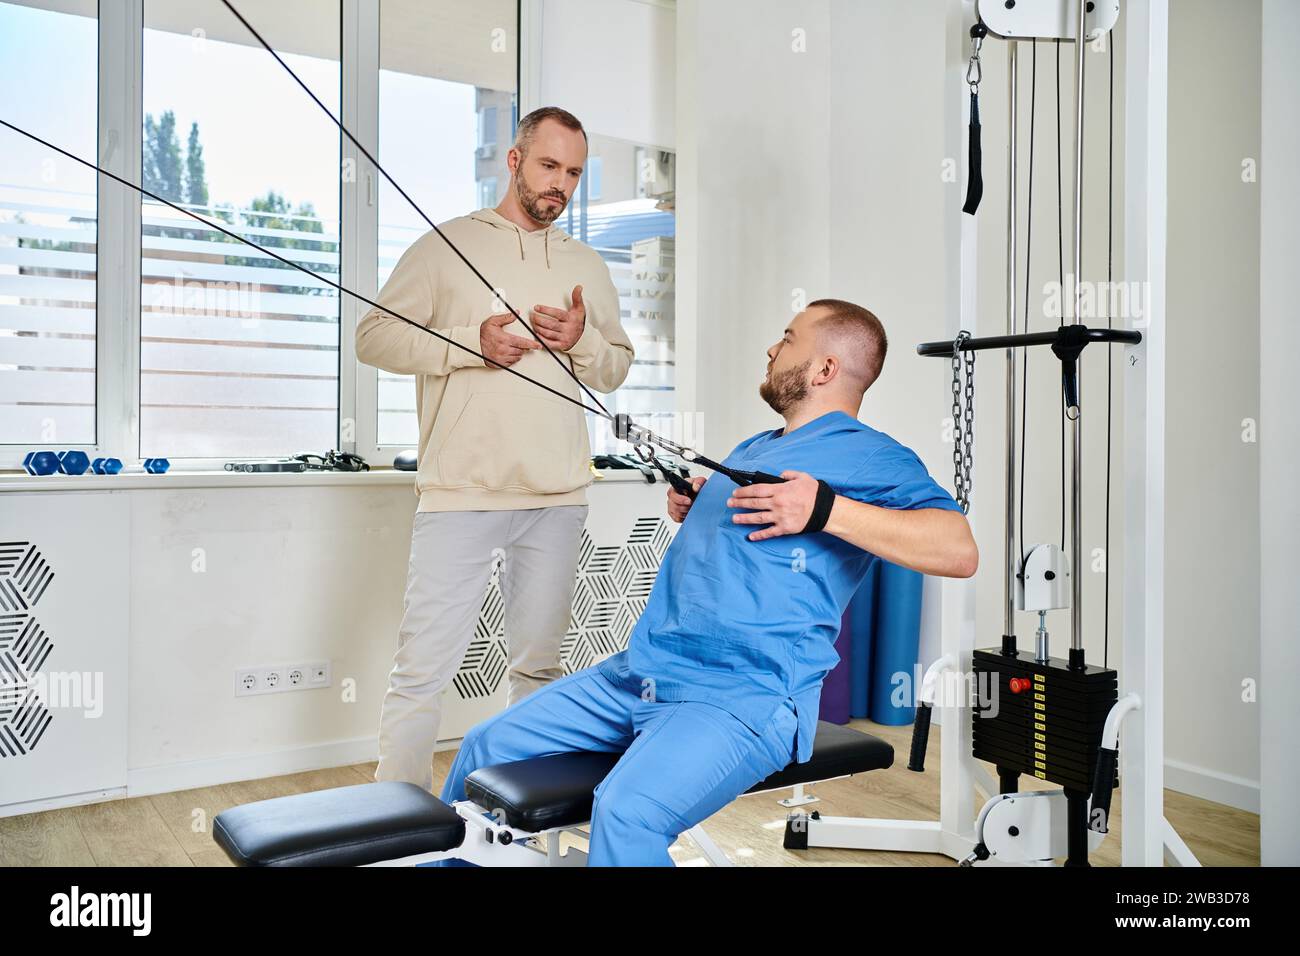 skilled rehabilitation specialist showing exercise on training machine to man in kinesiology center Stock Photo